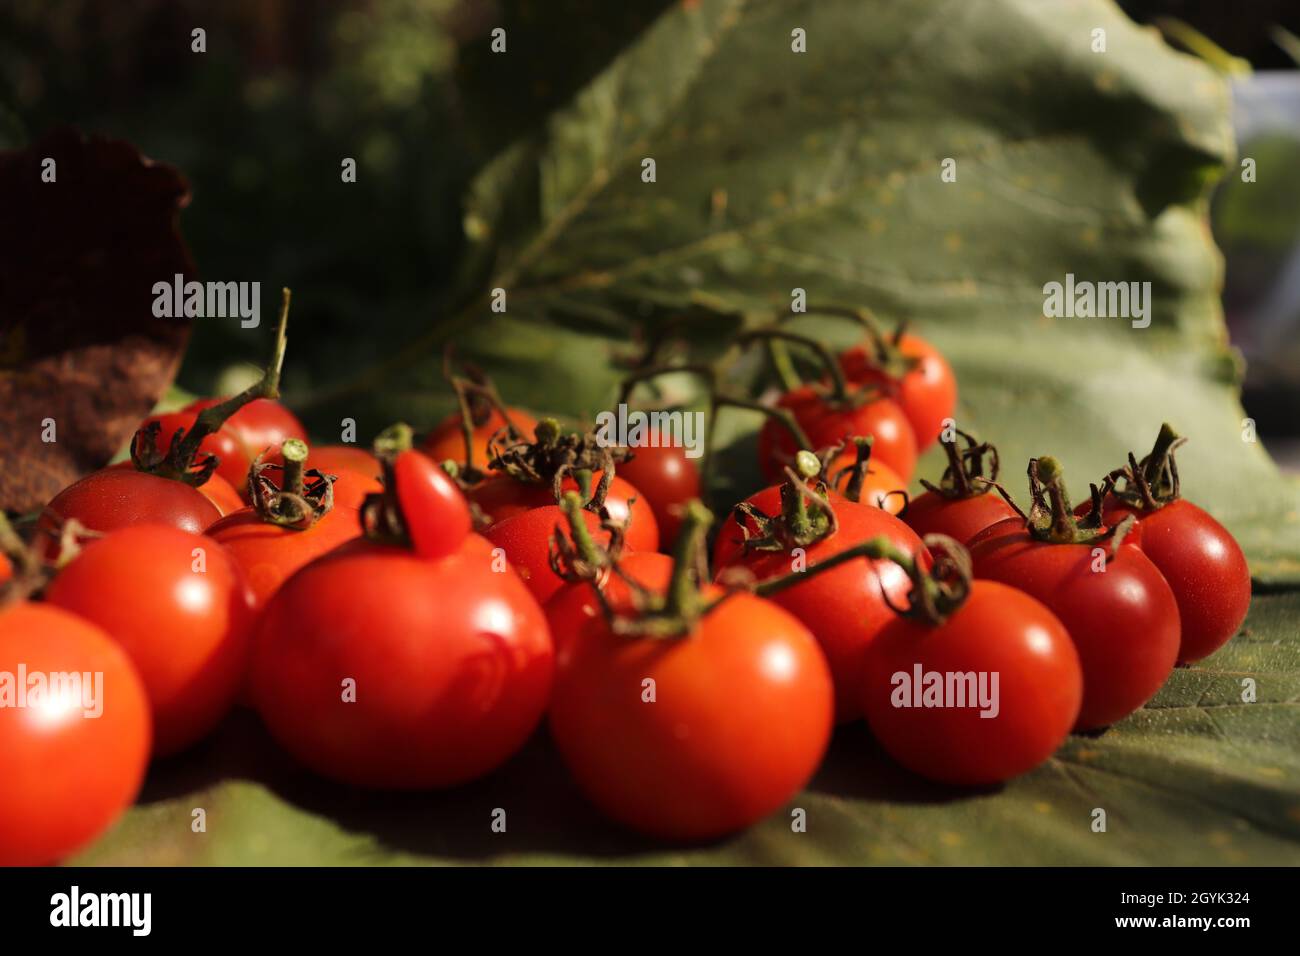 Beautiful shot of freshly picked cherry tomatoes on a leaf in a garden Stock Photo